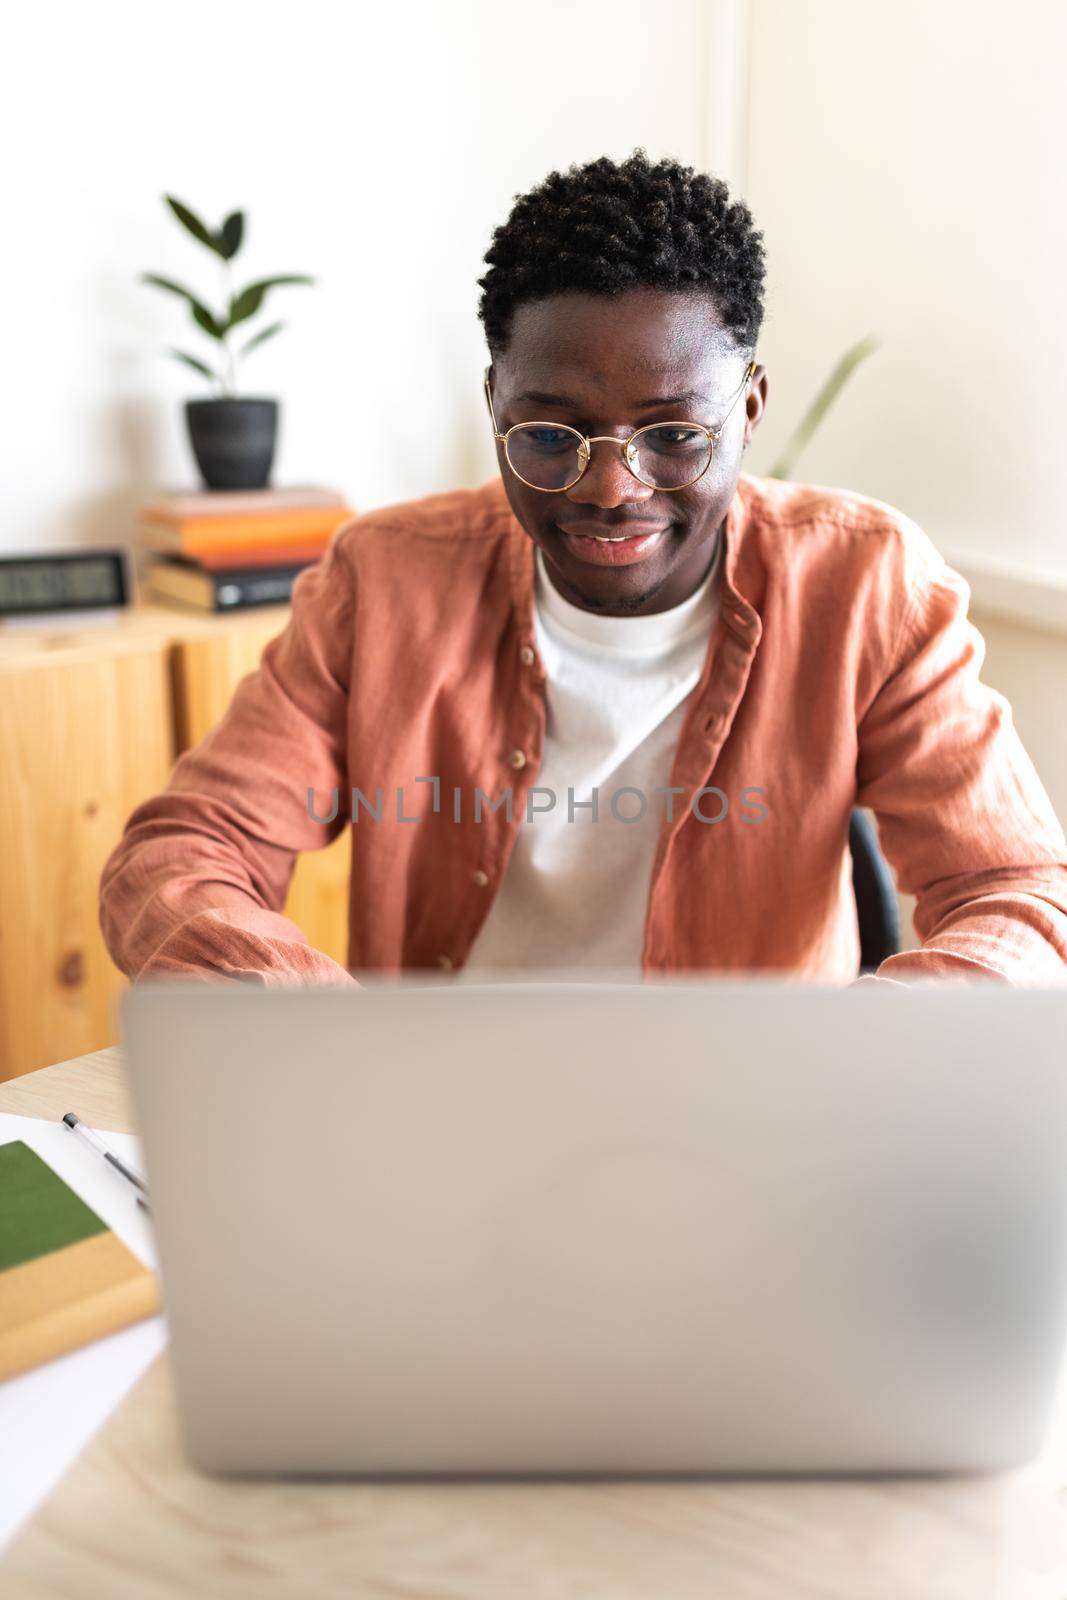 African American male college student studying at home using laptop. Vertical image. by Hoverstock